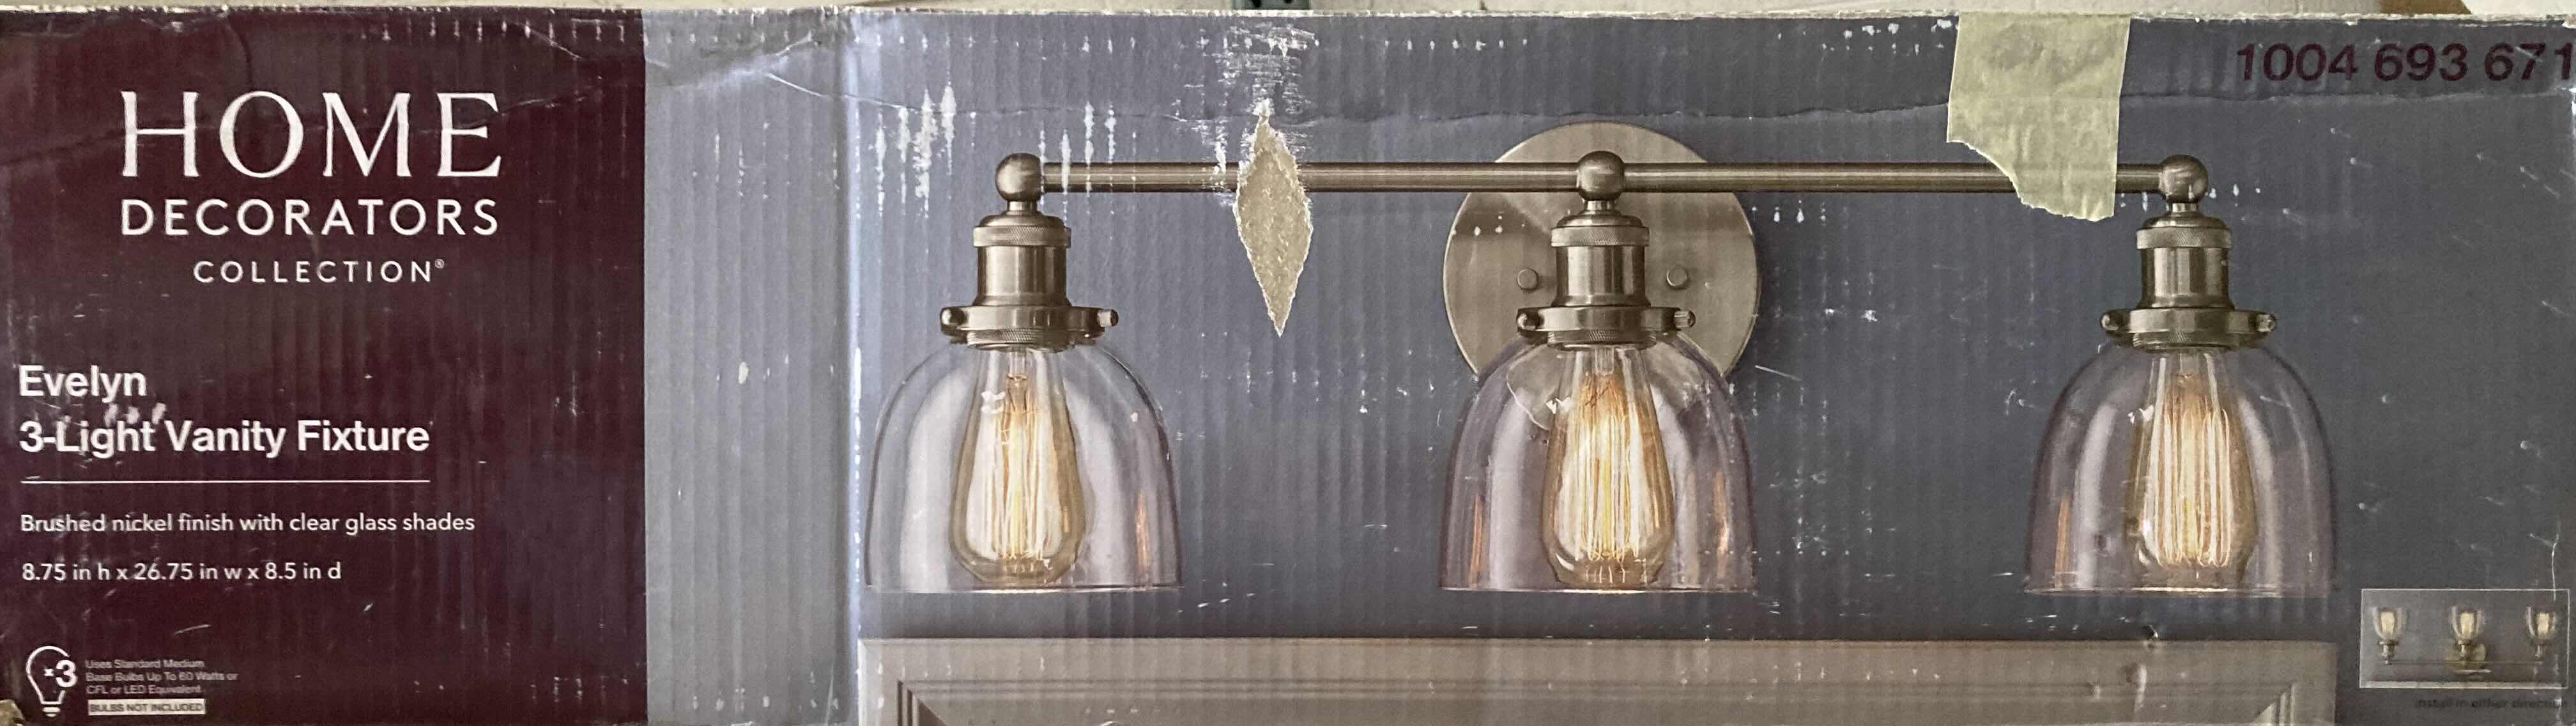 Photo 5 of HOME DECORATORS COLLECTION 26.75” EVELYN BRUSHED NICKEL 3 LIGHT INDUSTRIAL VANITY FIXTURE W CLEAR GLASS SHADES MODEL HB2586-35